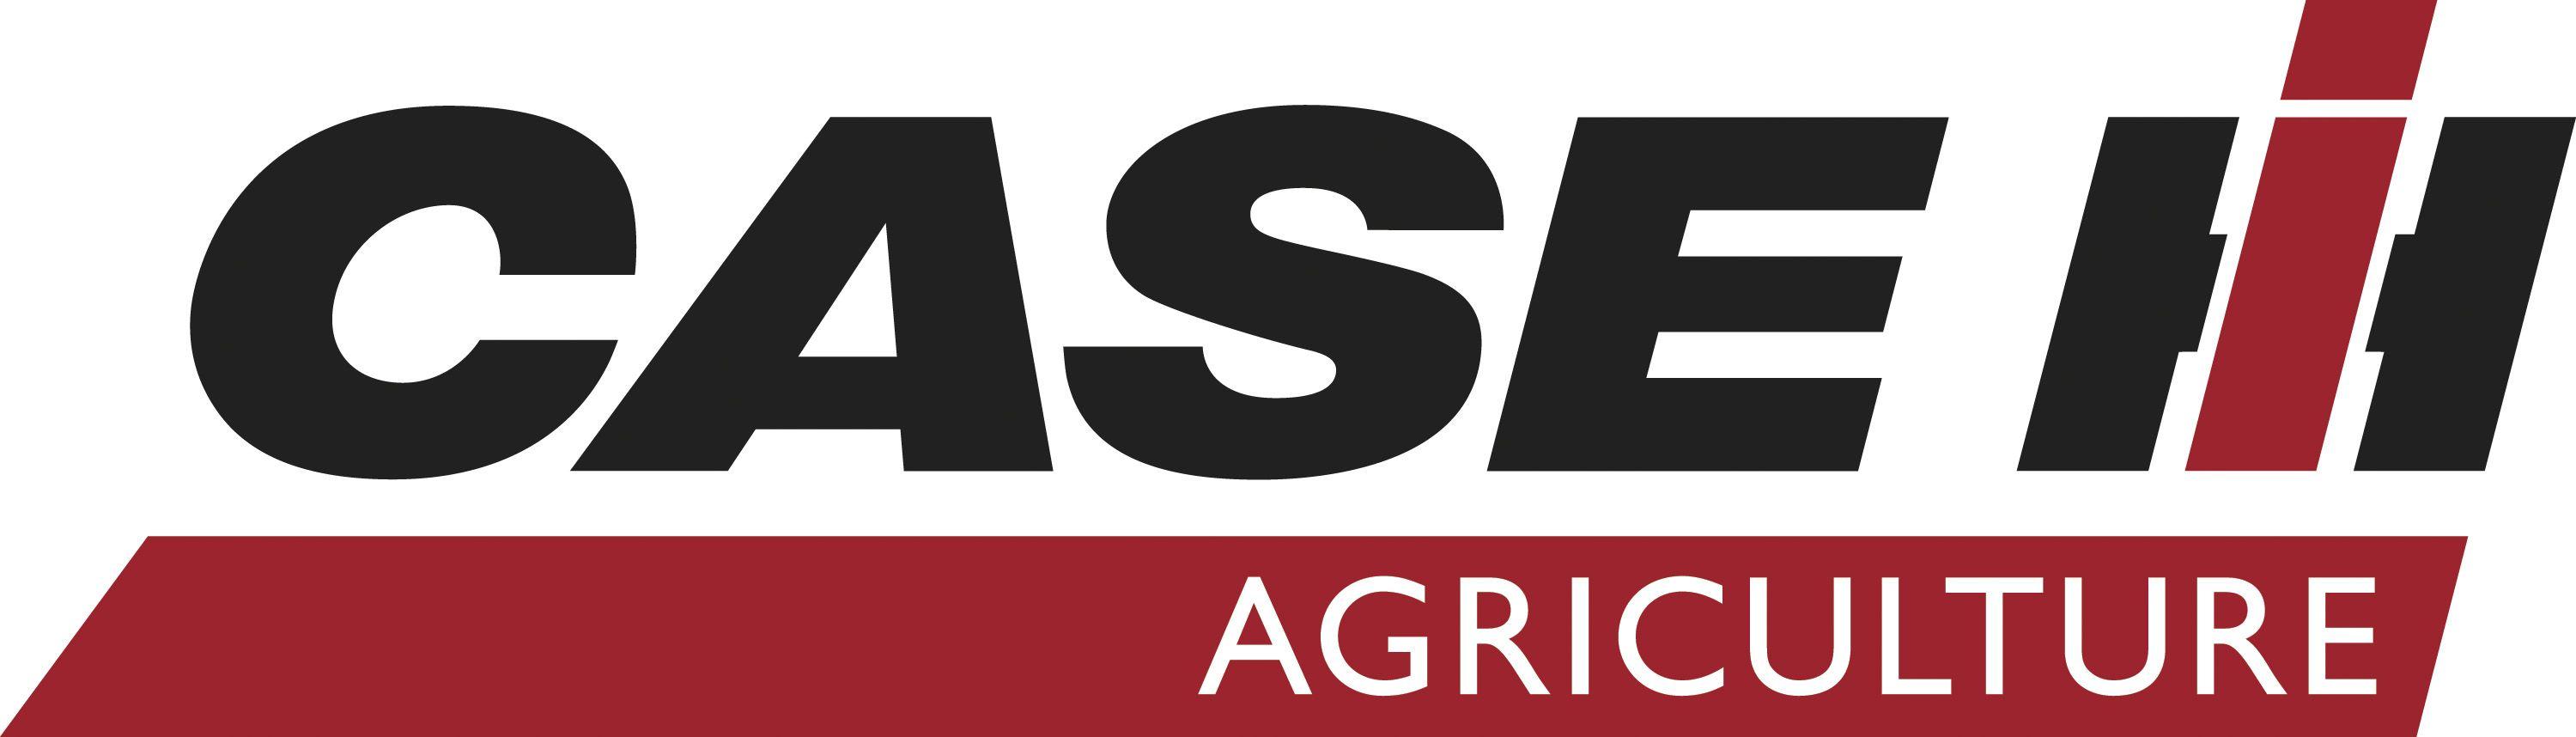 Case Agriculture Logo - About | International Harvester and Case IH | Case ih, Tractors, Country